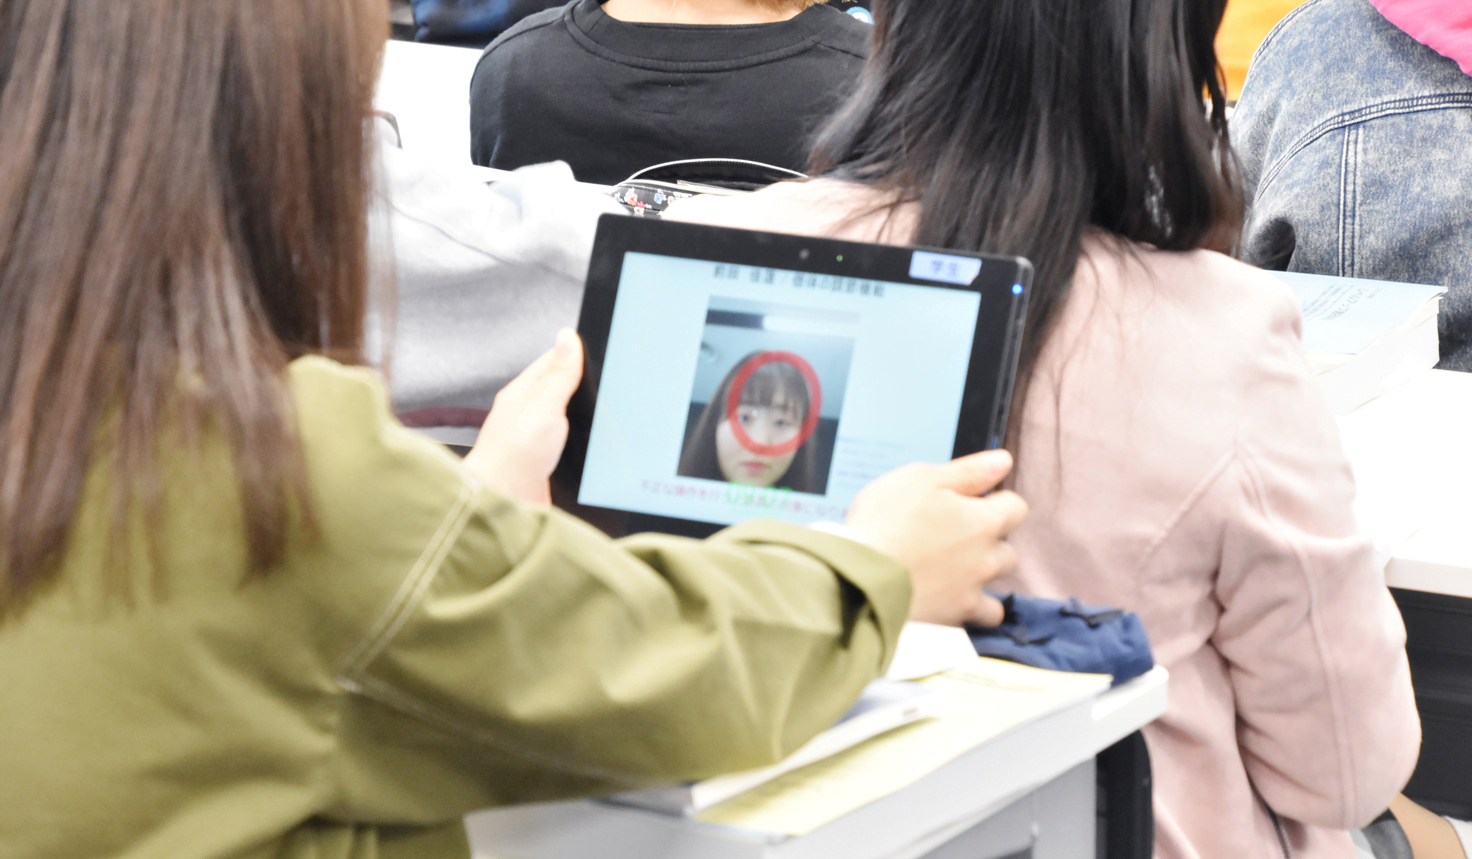 Japanese college using facial recognition to log attendance